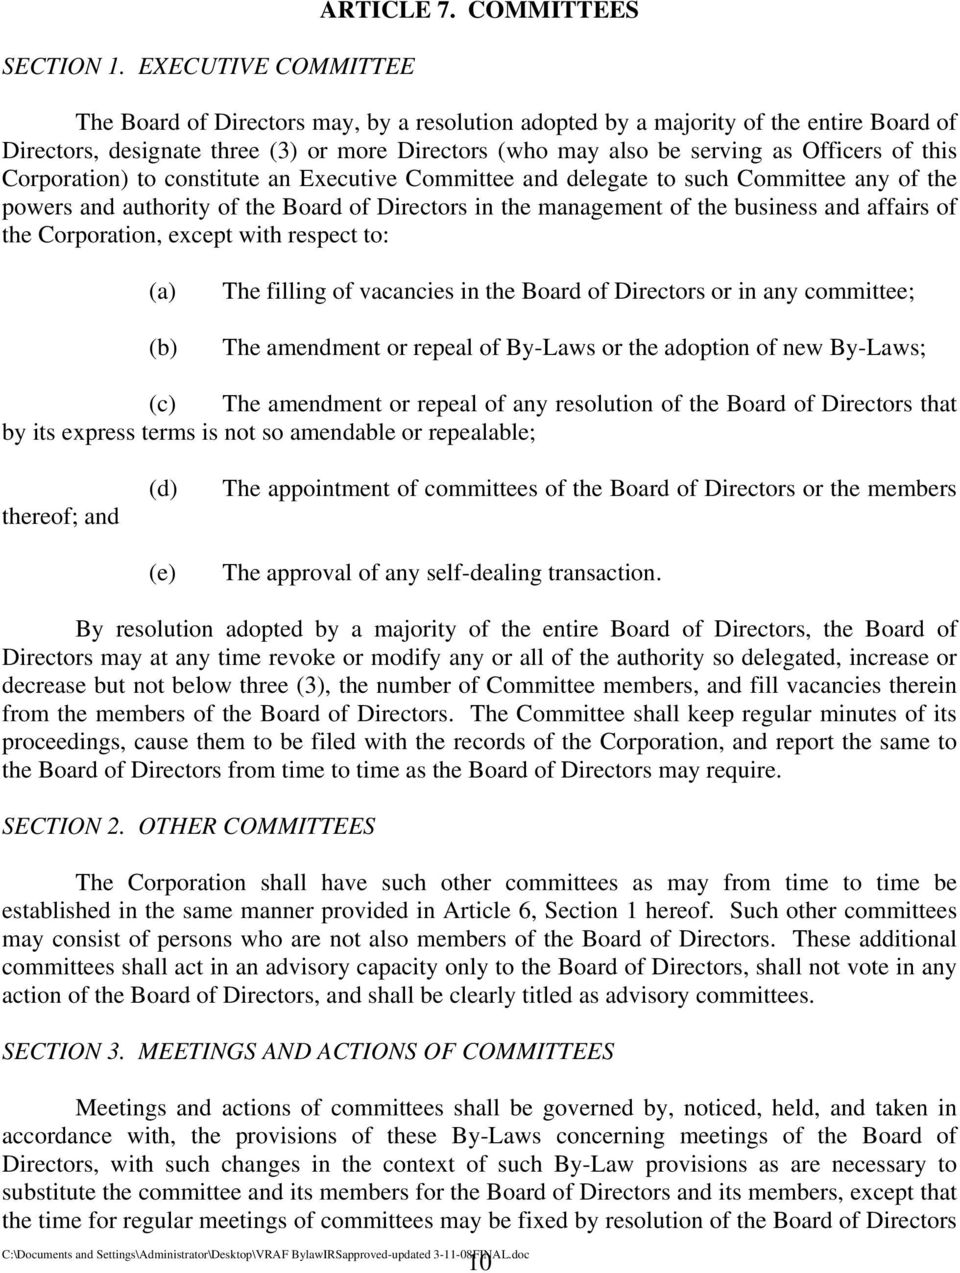 Corporation) to constitute an Executive Committee and delegate to such Committee any of the powers and authority of the Board of Directors in the management of the business and affairs of the